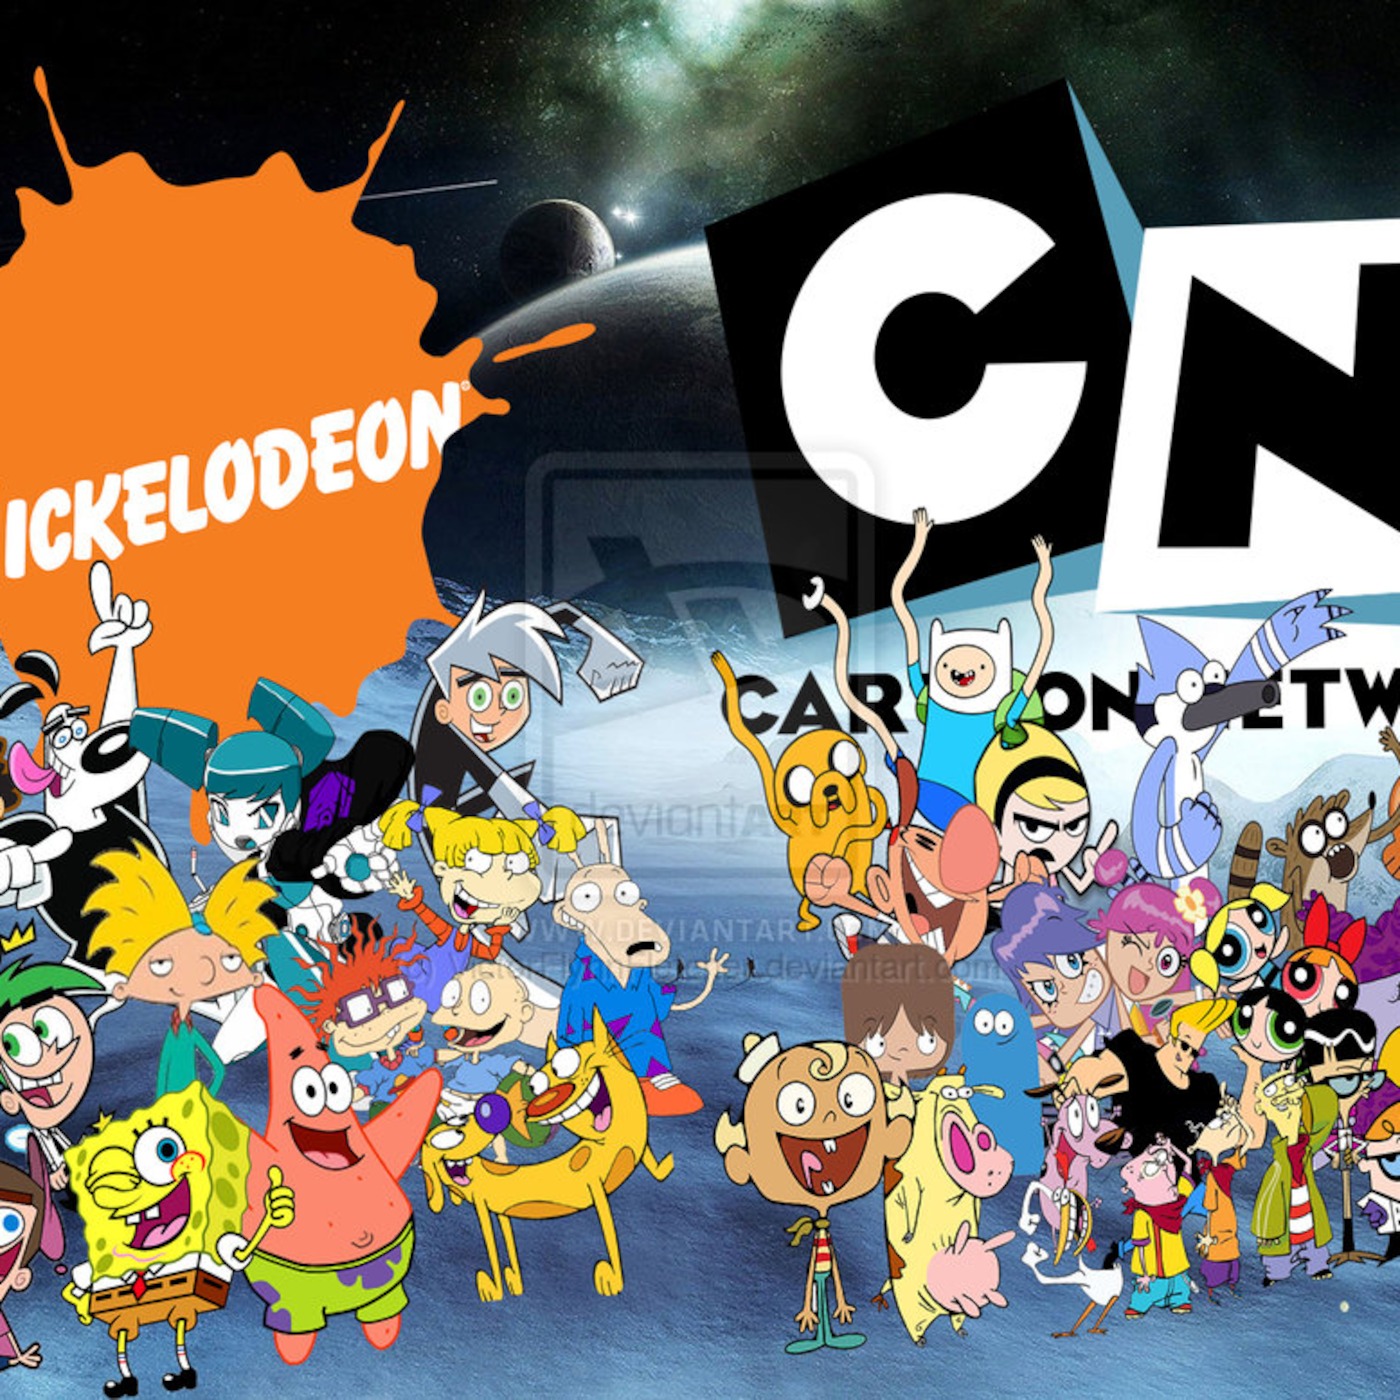 Cartoon Tournament Nickelodeon Dominant As F K Free Hot Nude Porn Pic